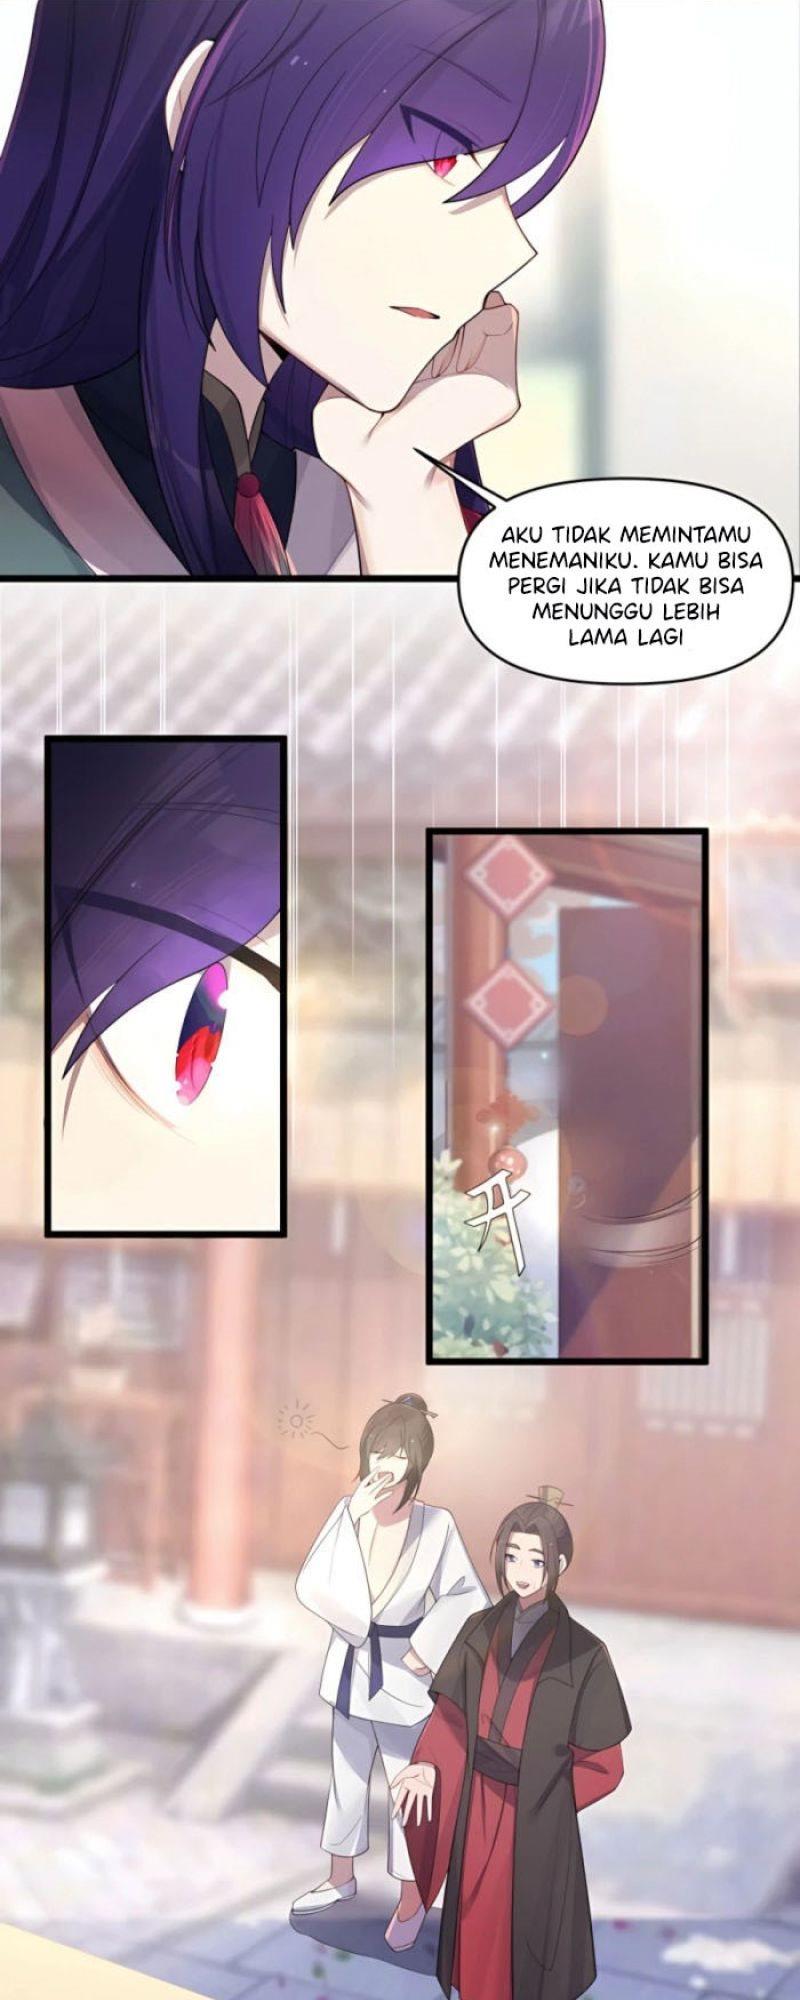 The Lady is the Future Tyrant Chapter 21